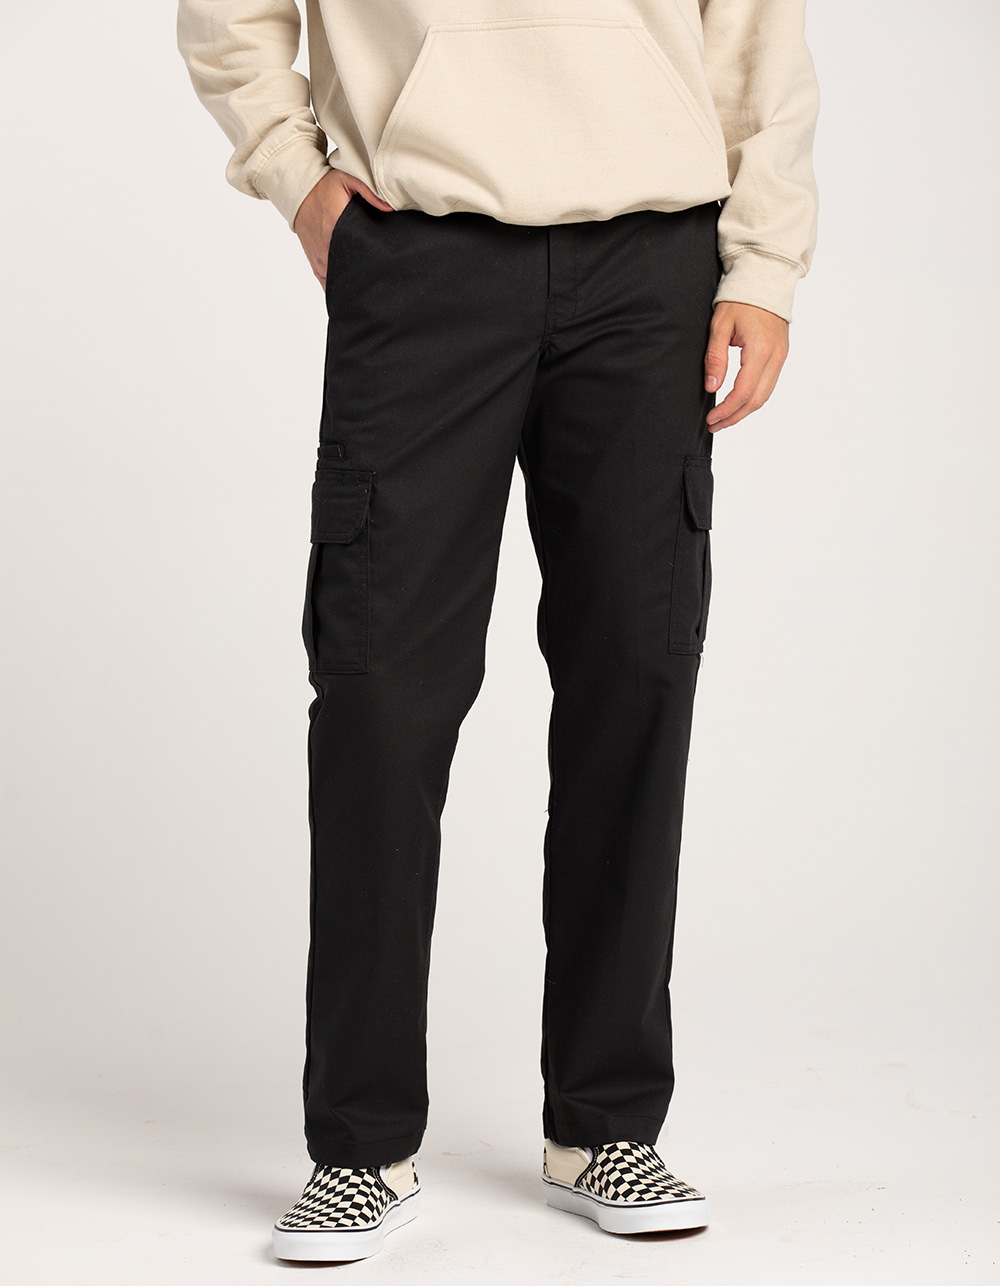 Top 61+ dickies cargo trousers latest - in.cdgdbentre